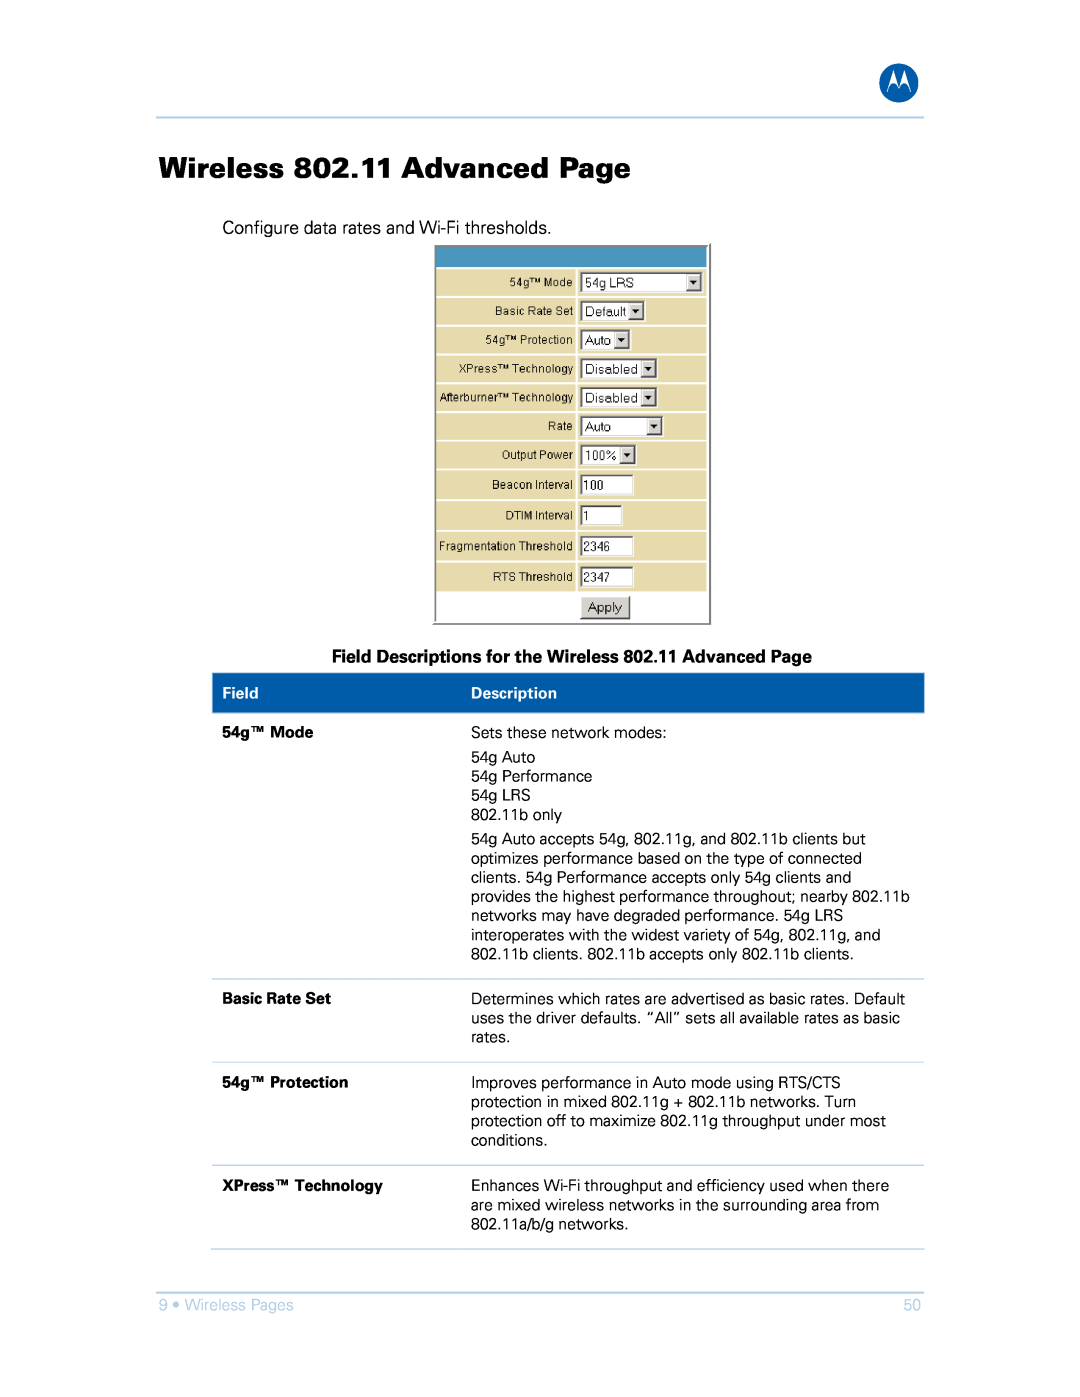 Motorola SVG1501UE Field Descriptions for the Wireless 802.11 Advanced Page, 54g Mode, Basic Rate Set, 54g Protection 